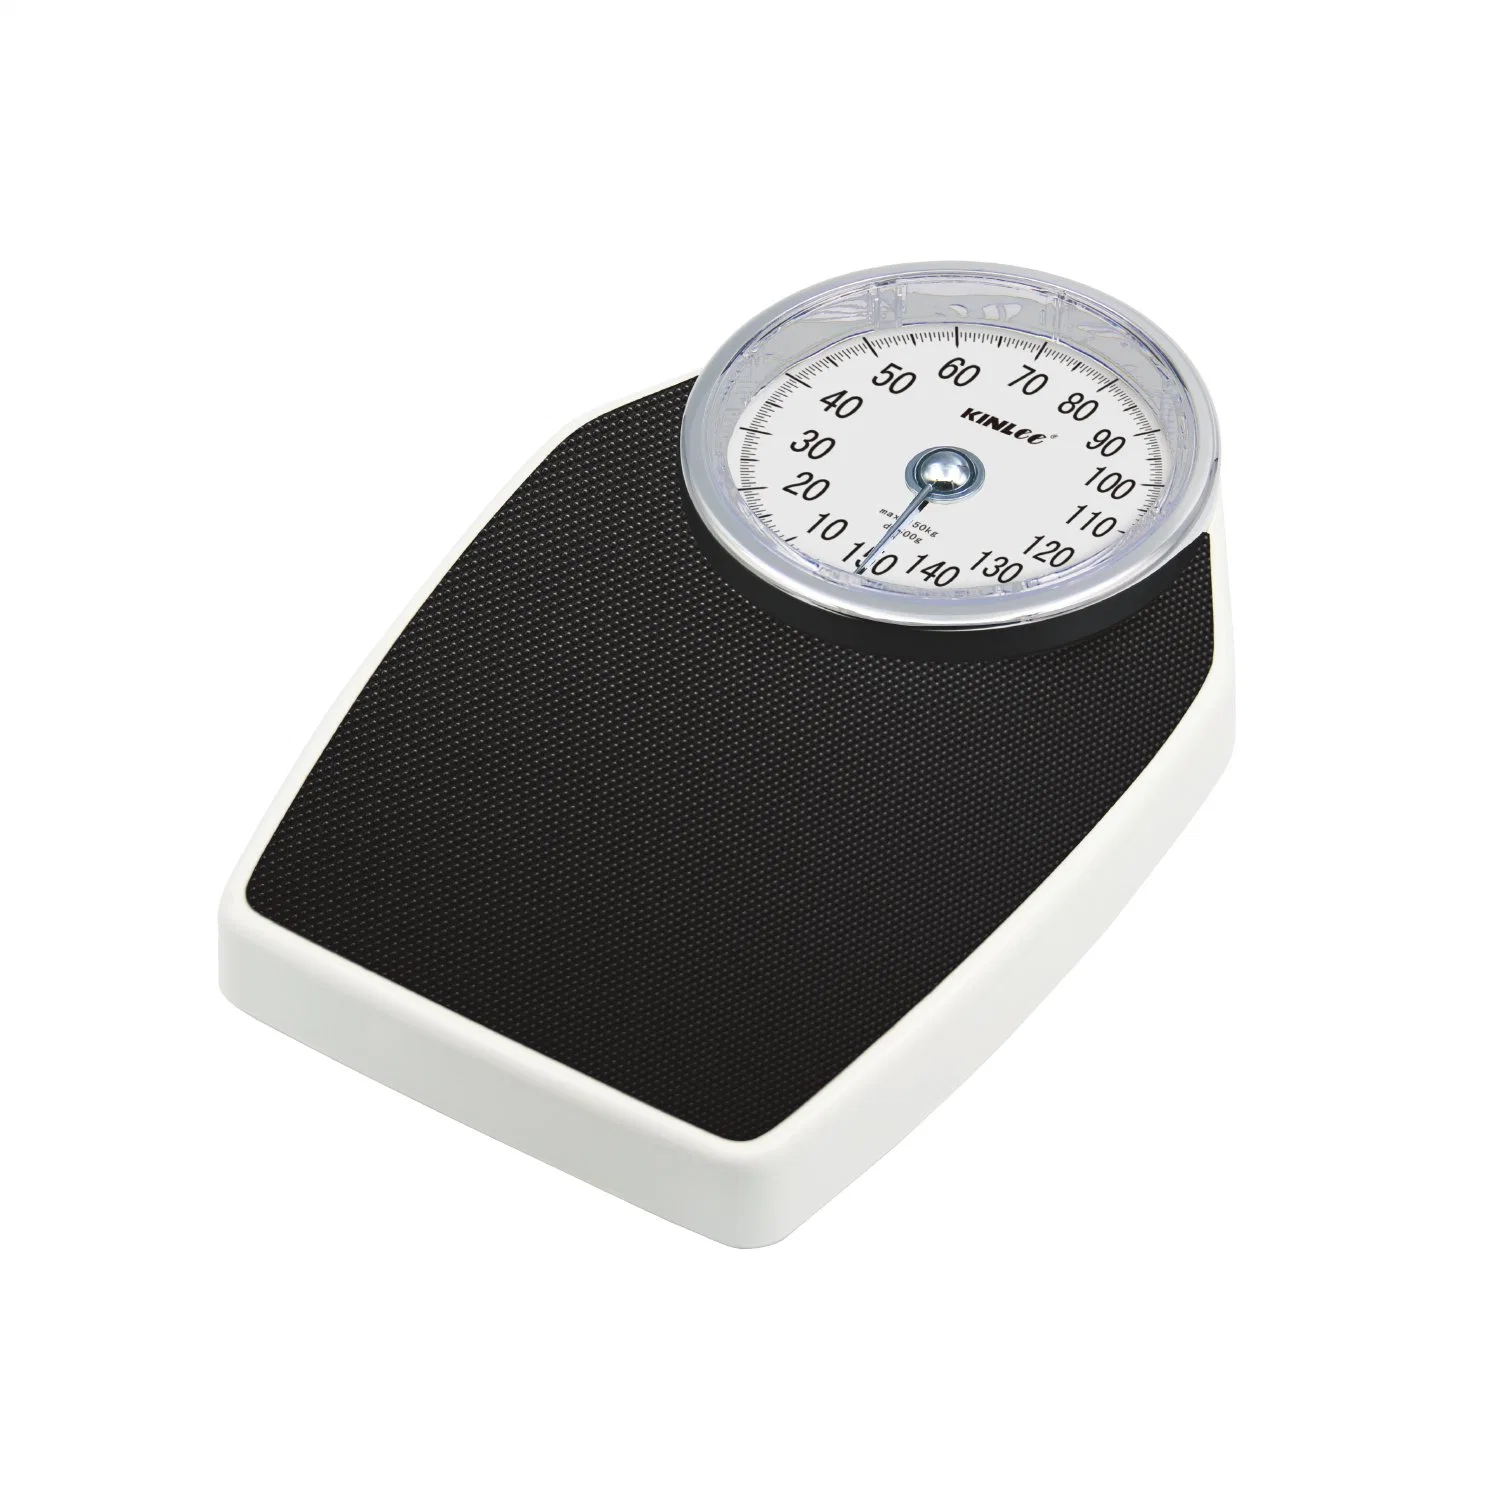 Dt01 Personal Body Weight Mechanical Bathroom Body Weighing Scale